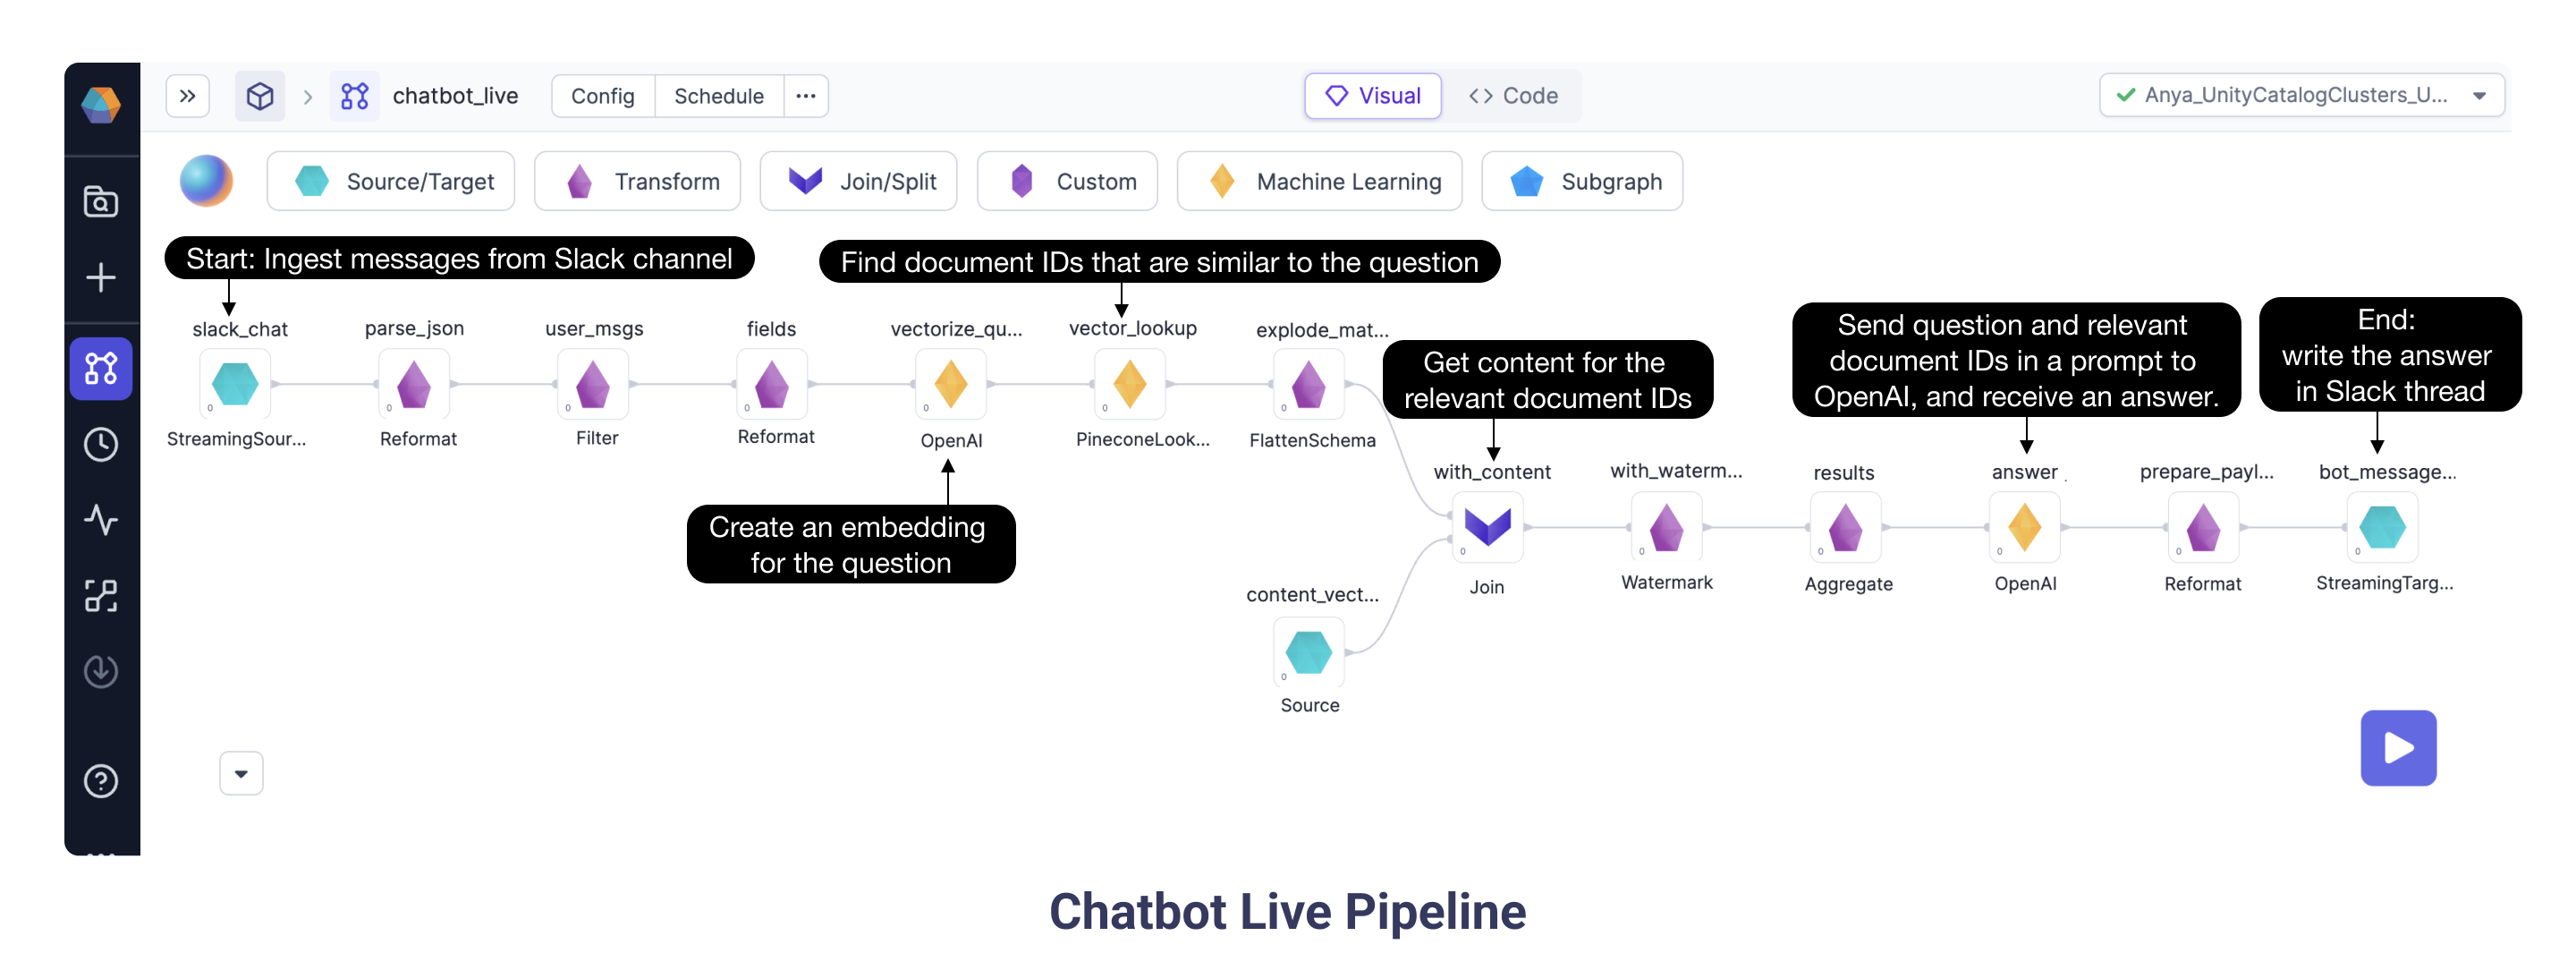 Chatbot Live Pipeline